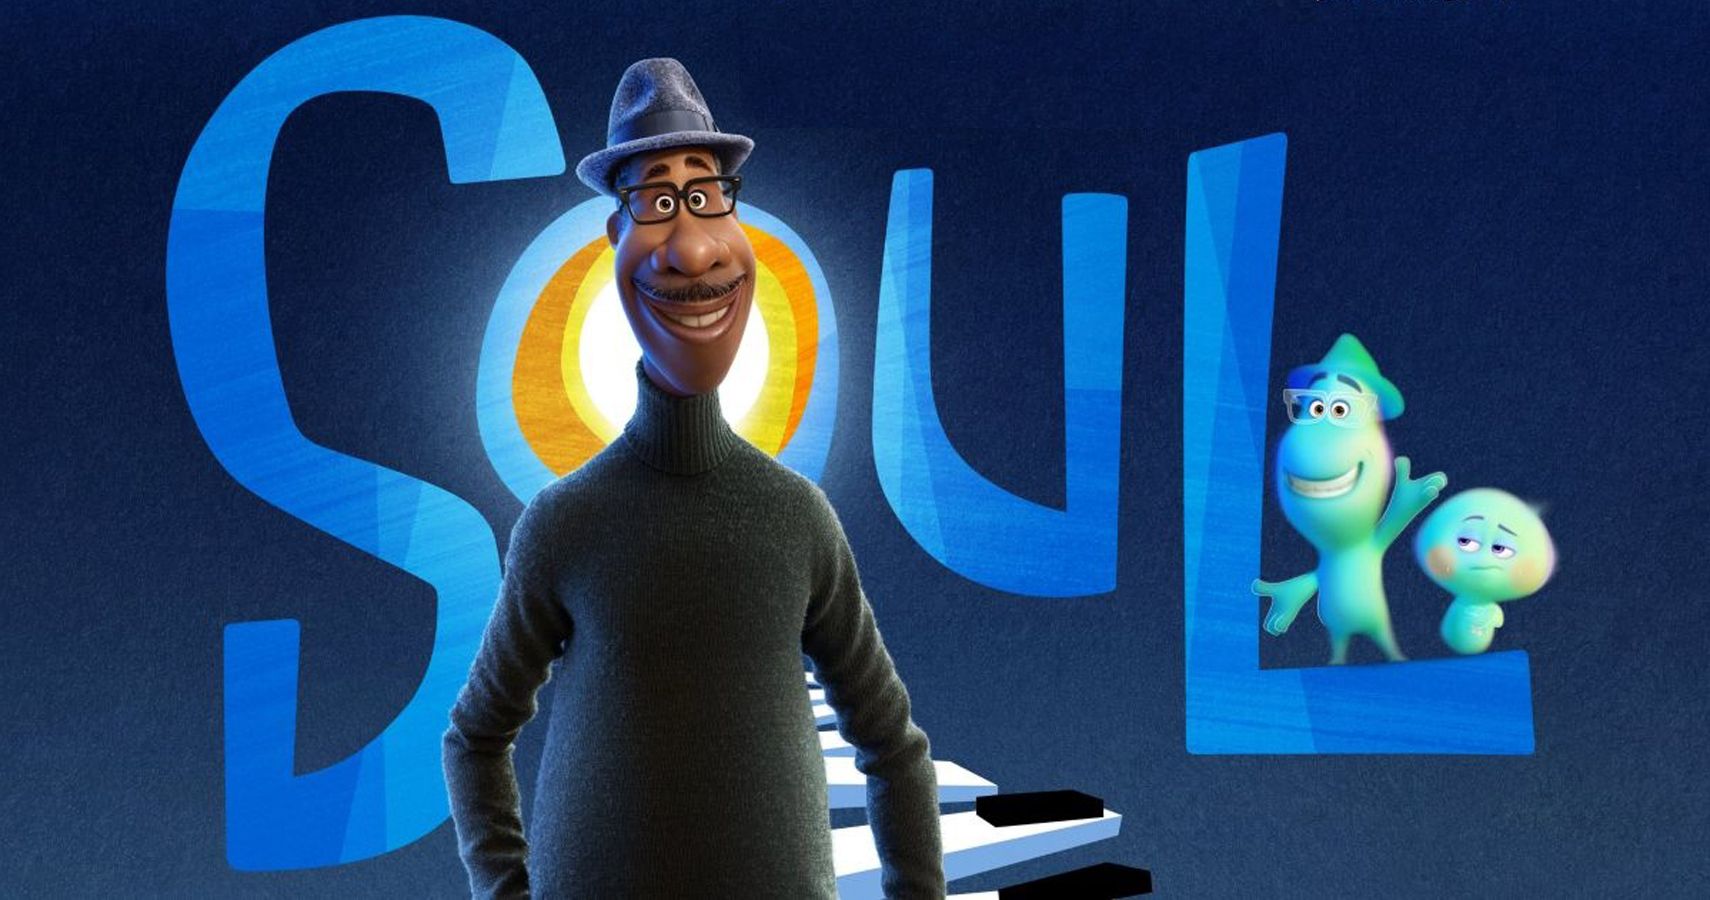 5 Questions Families Can Explore Together From The Movie ‘Soul’